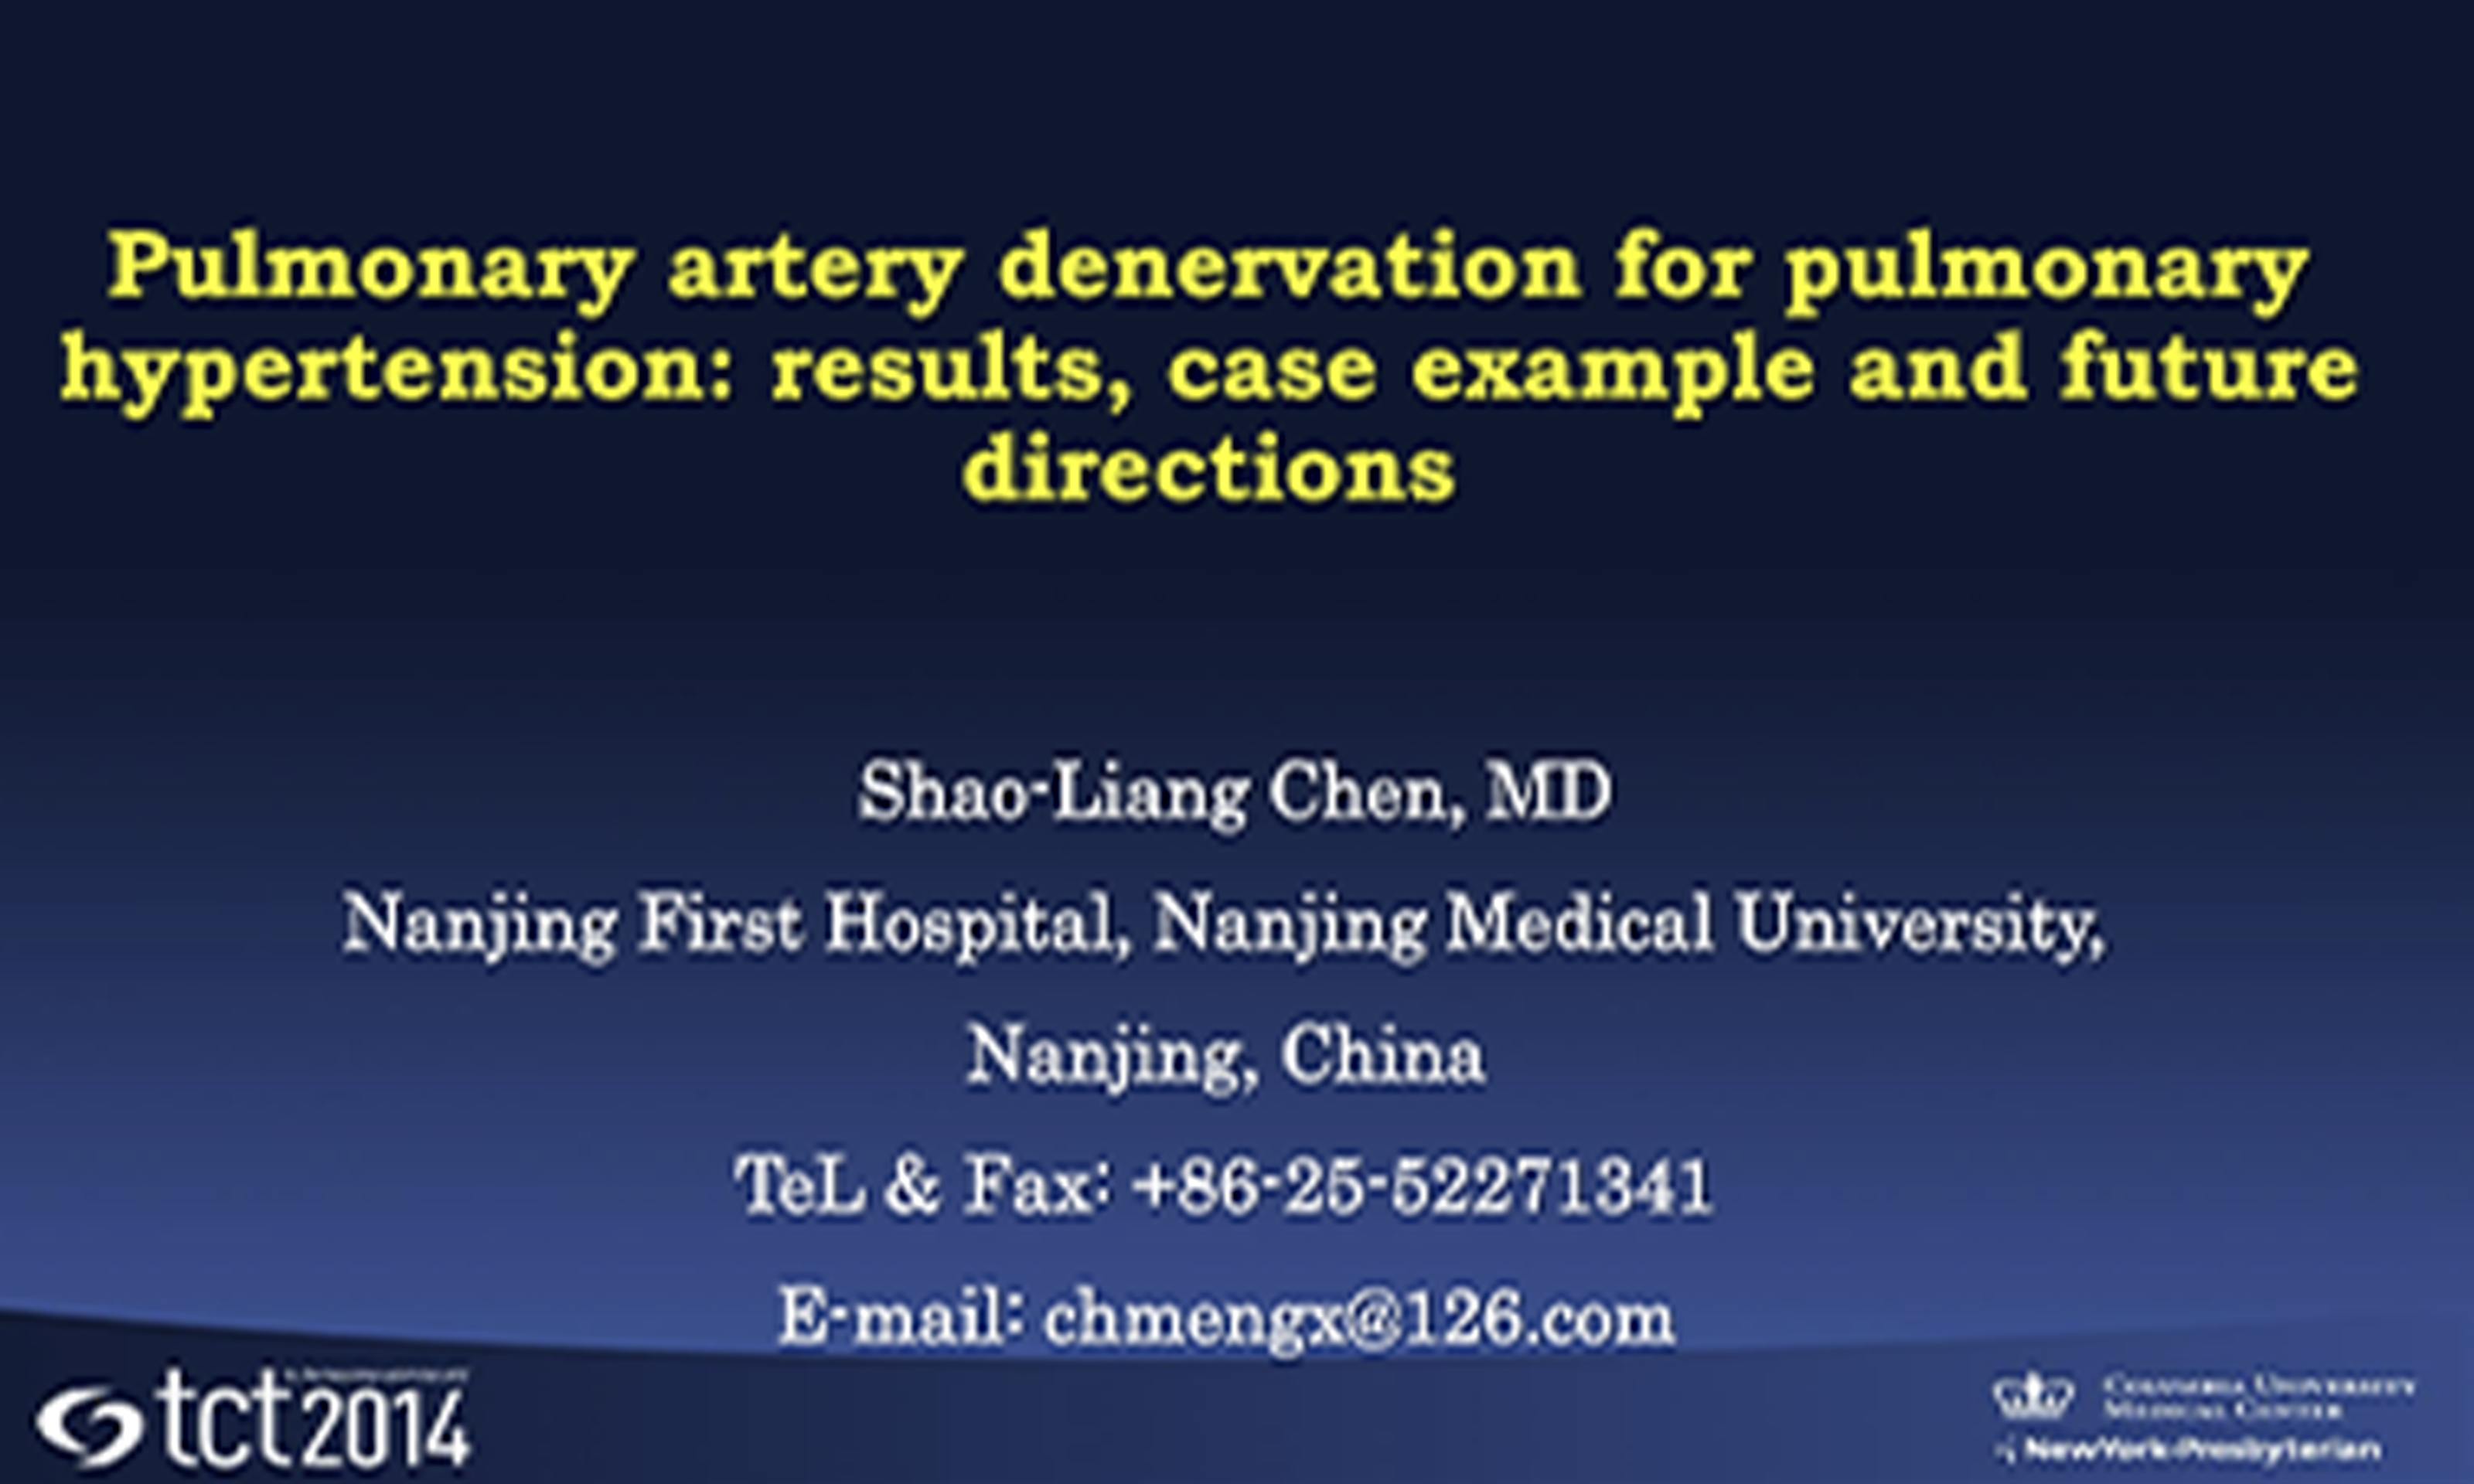 Pulmonary artery denervation for pulmonaryhypertension: results, case example and futuredirections